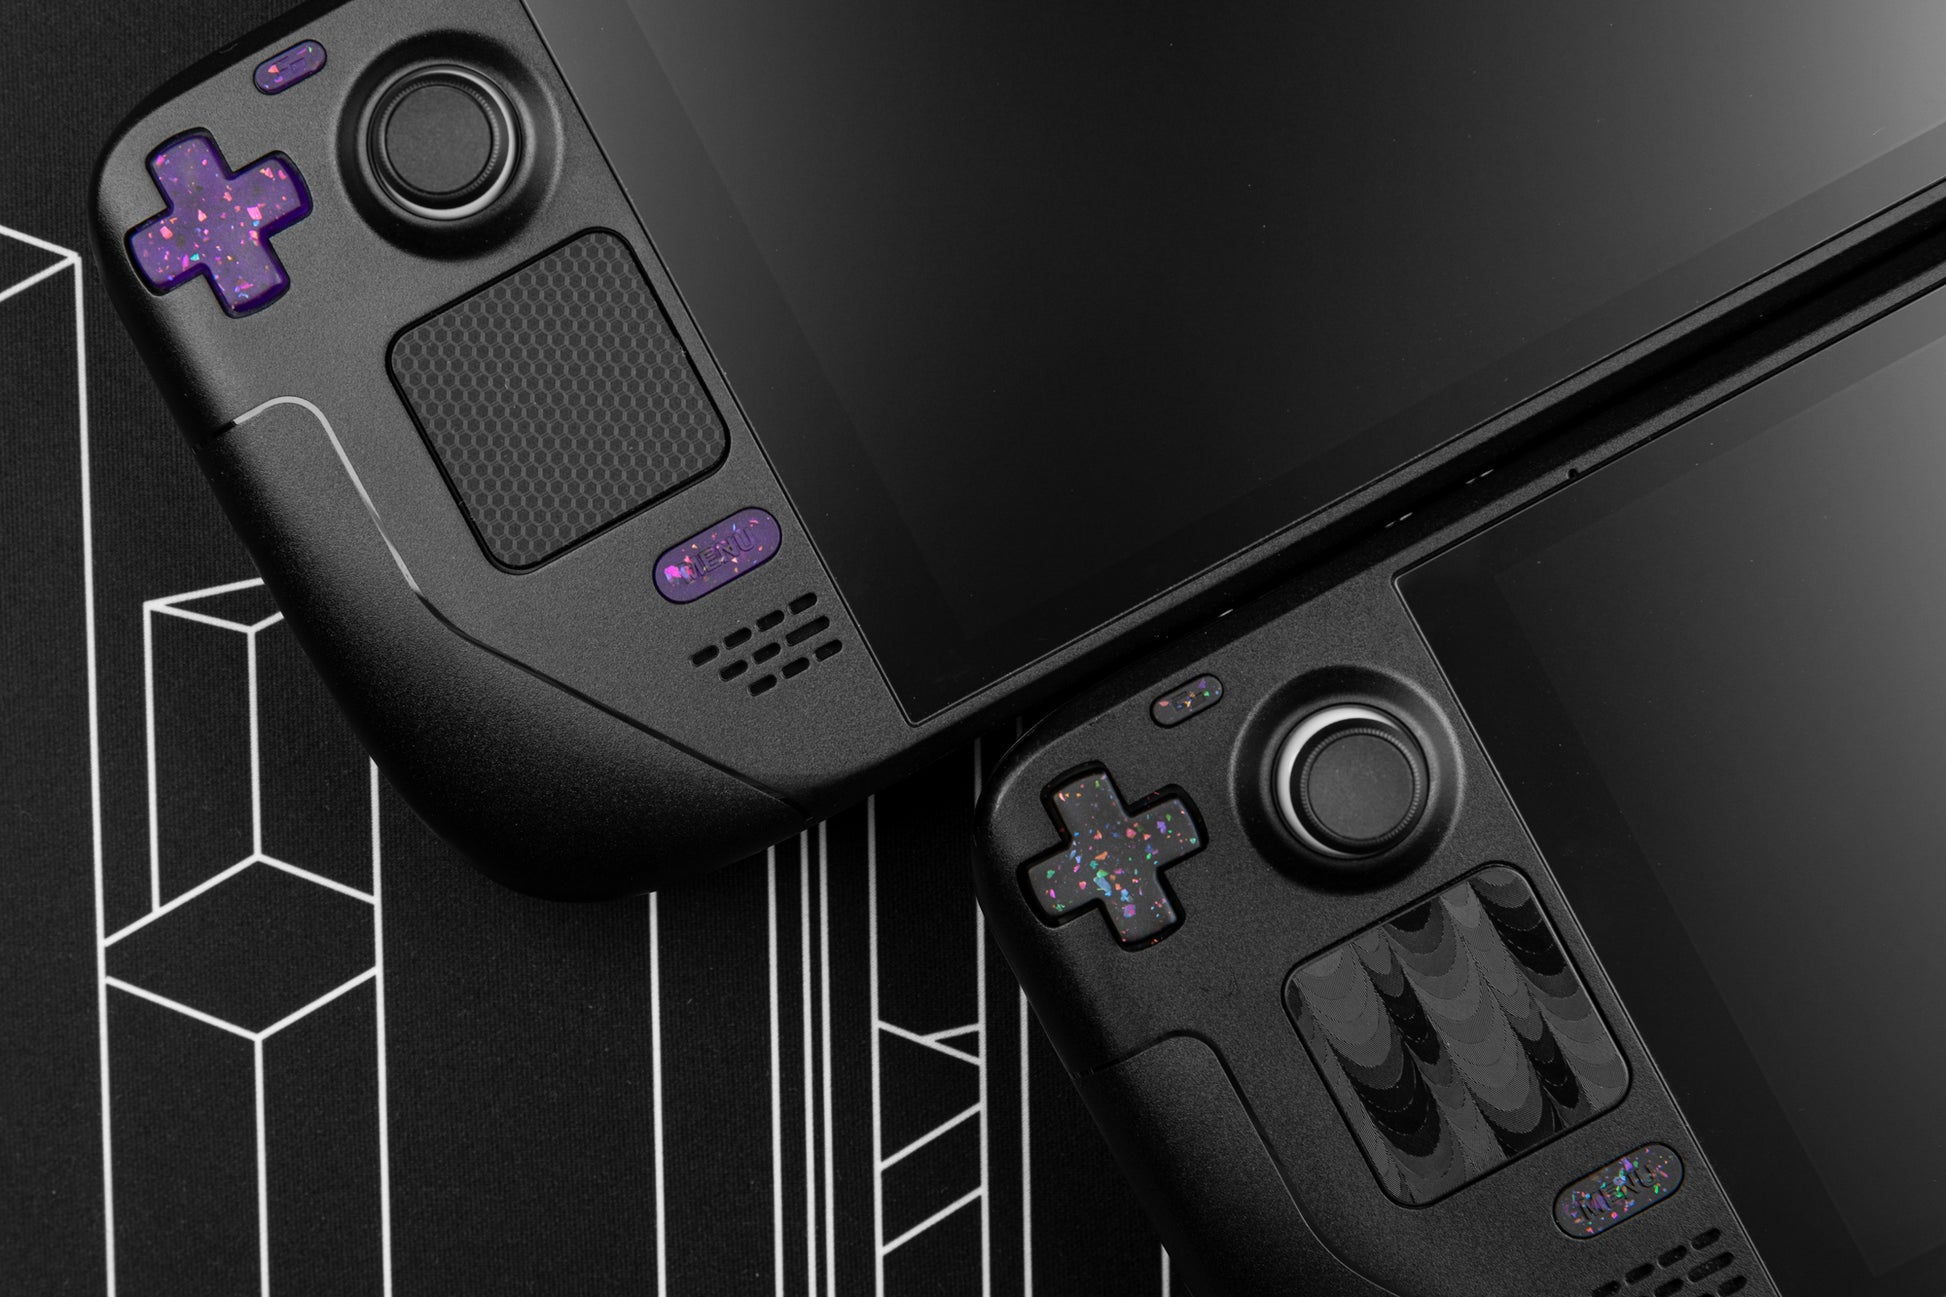 two steam decks dpad side showing black and purple button sets installed